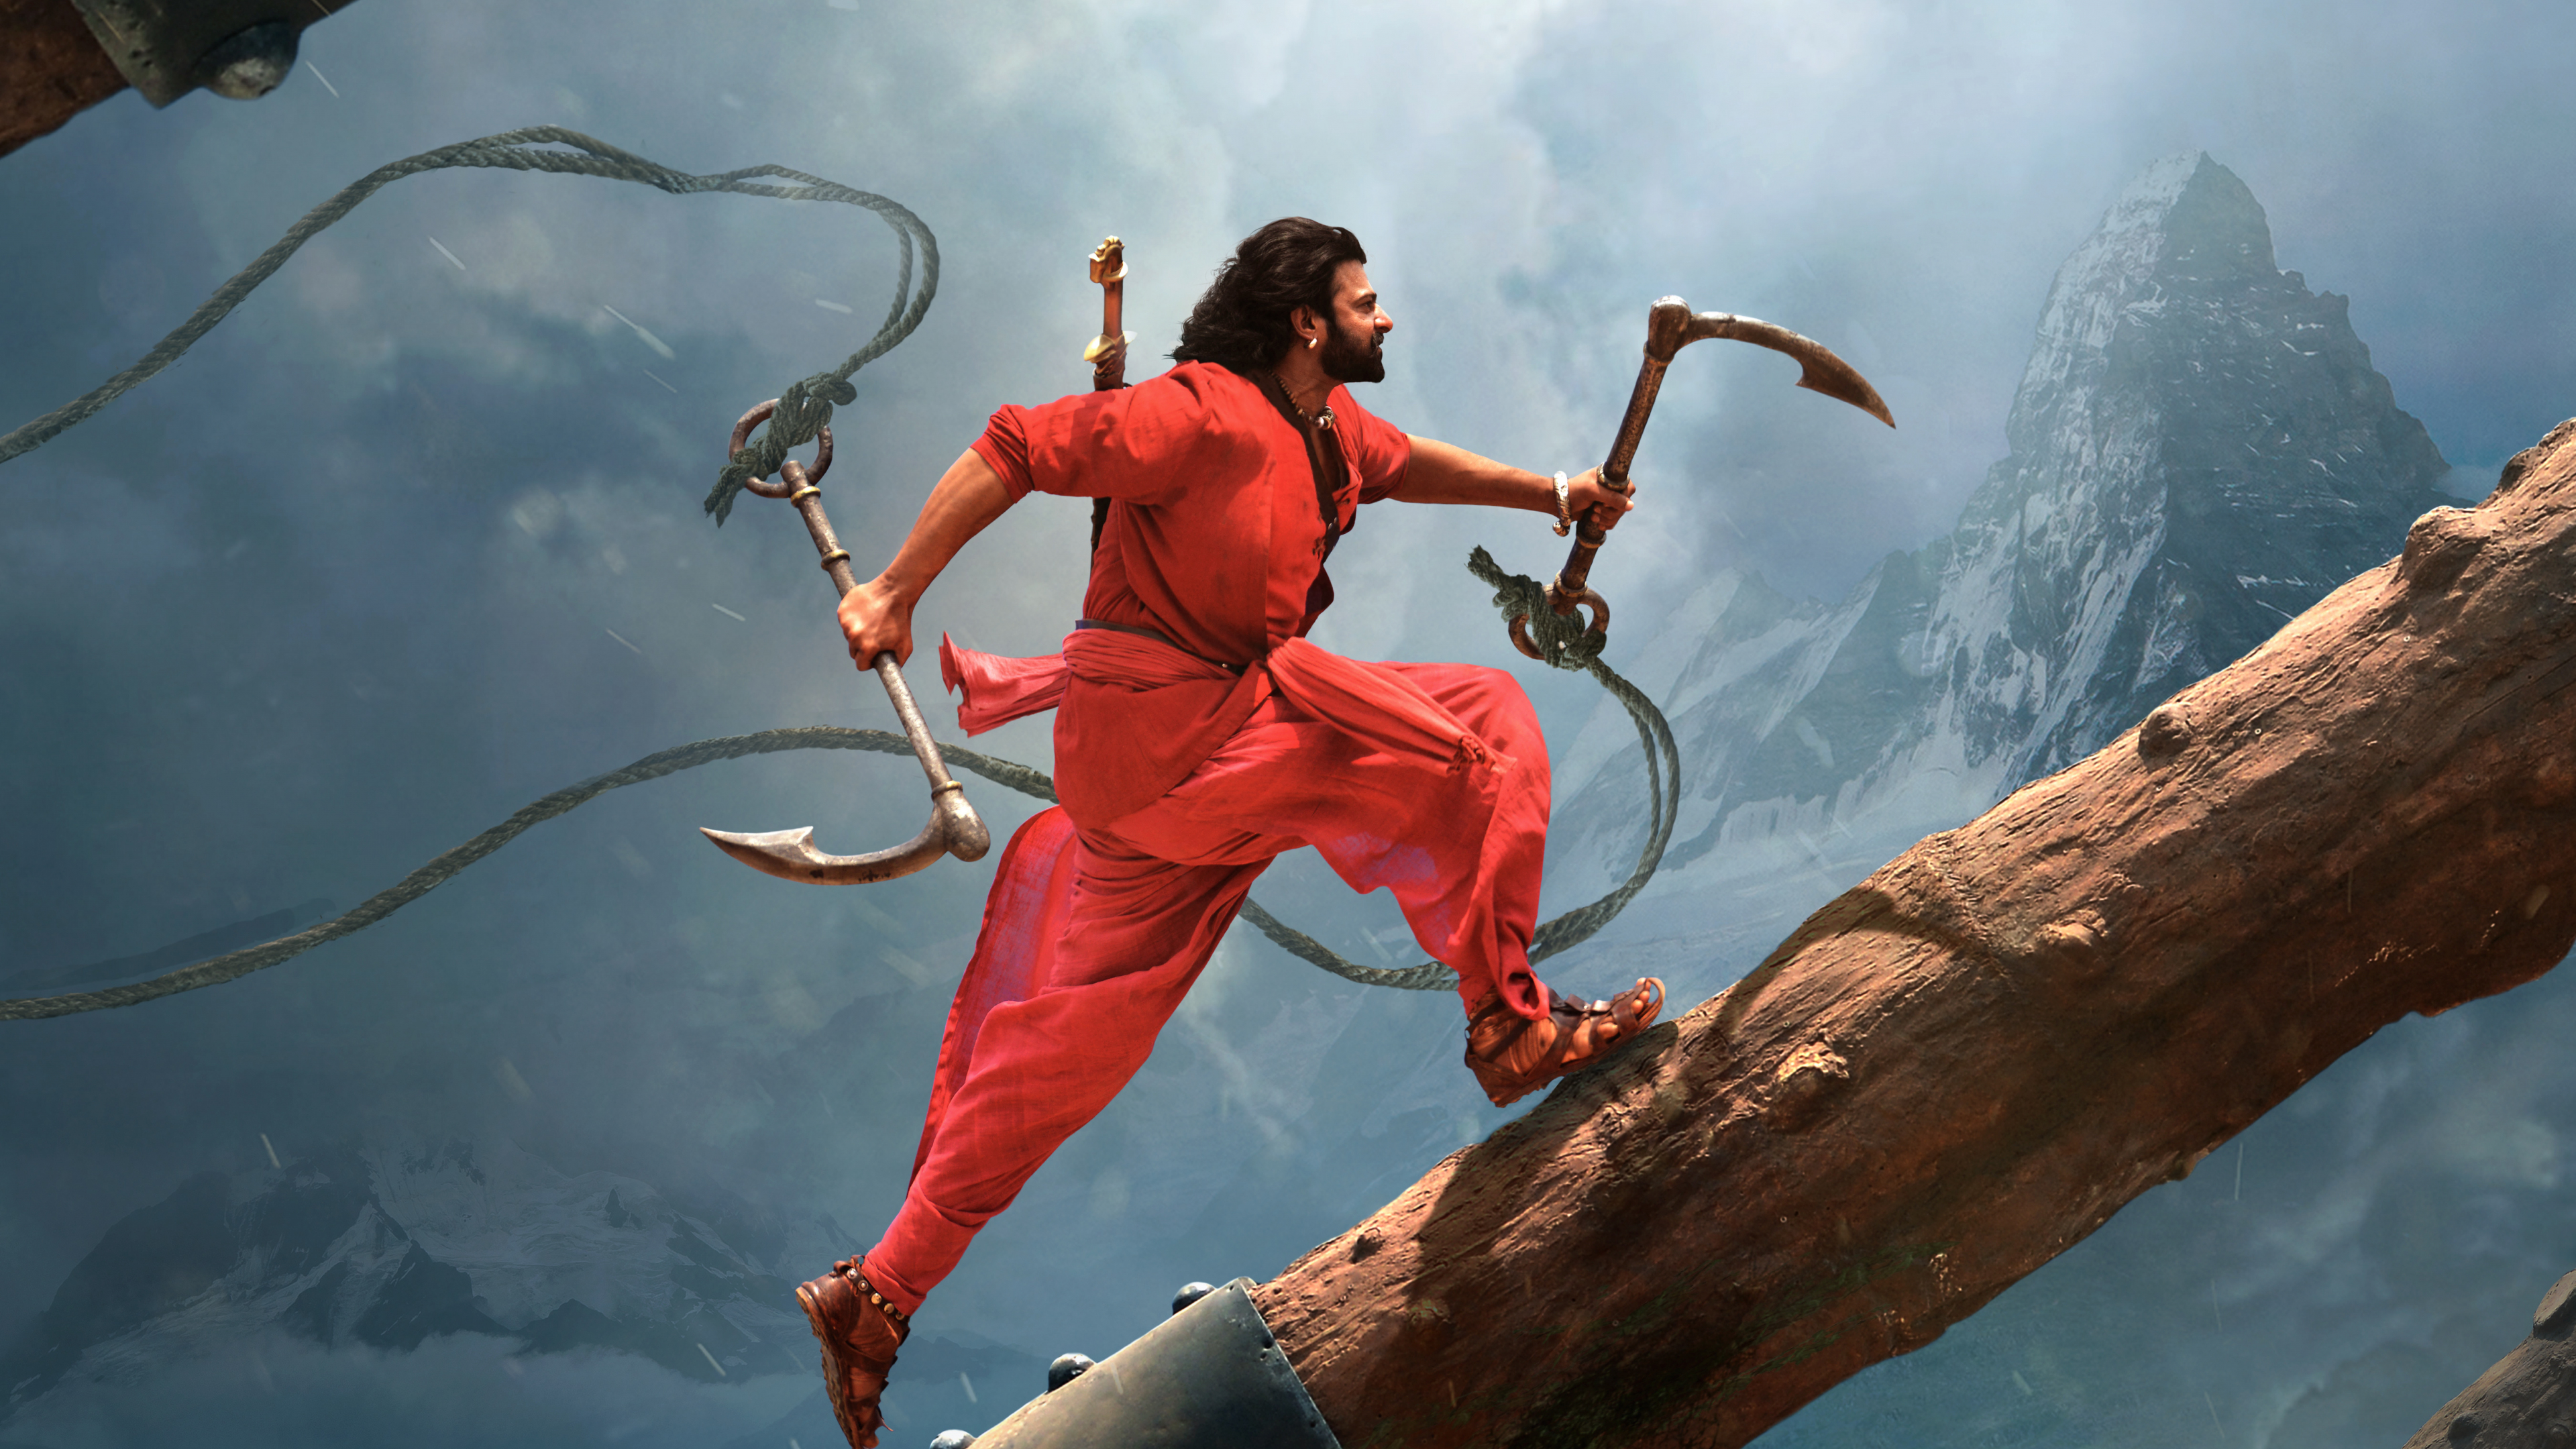 Download 3840x2160 Wallpaper Baahubali 2: The Conclusion, Bollywood Movie,  Prabhas, Run, 4k, 4 K, Uhd 16:9, Widescreen, 3840x2160 Hd Image,  Background, 15422